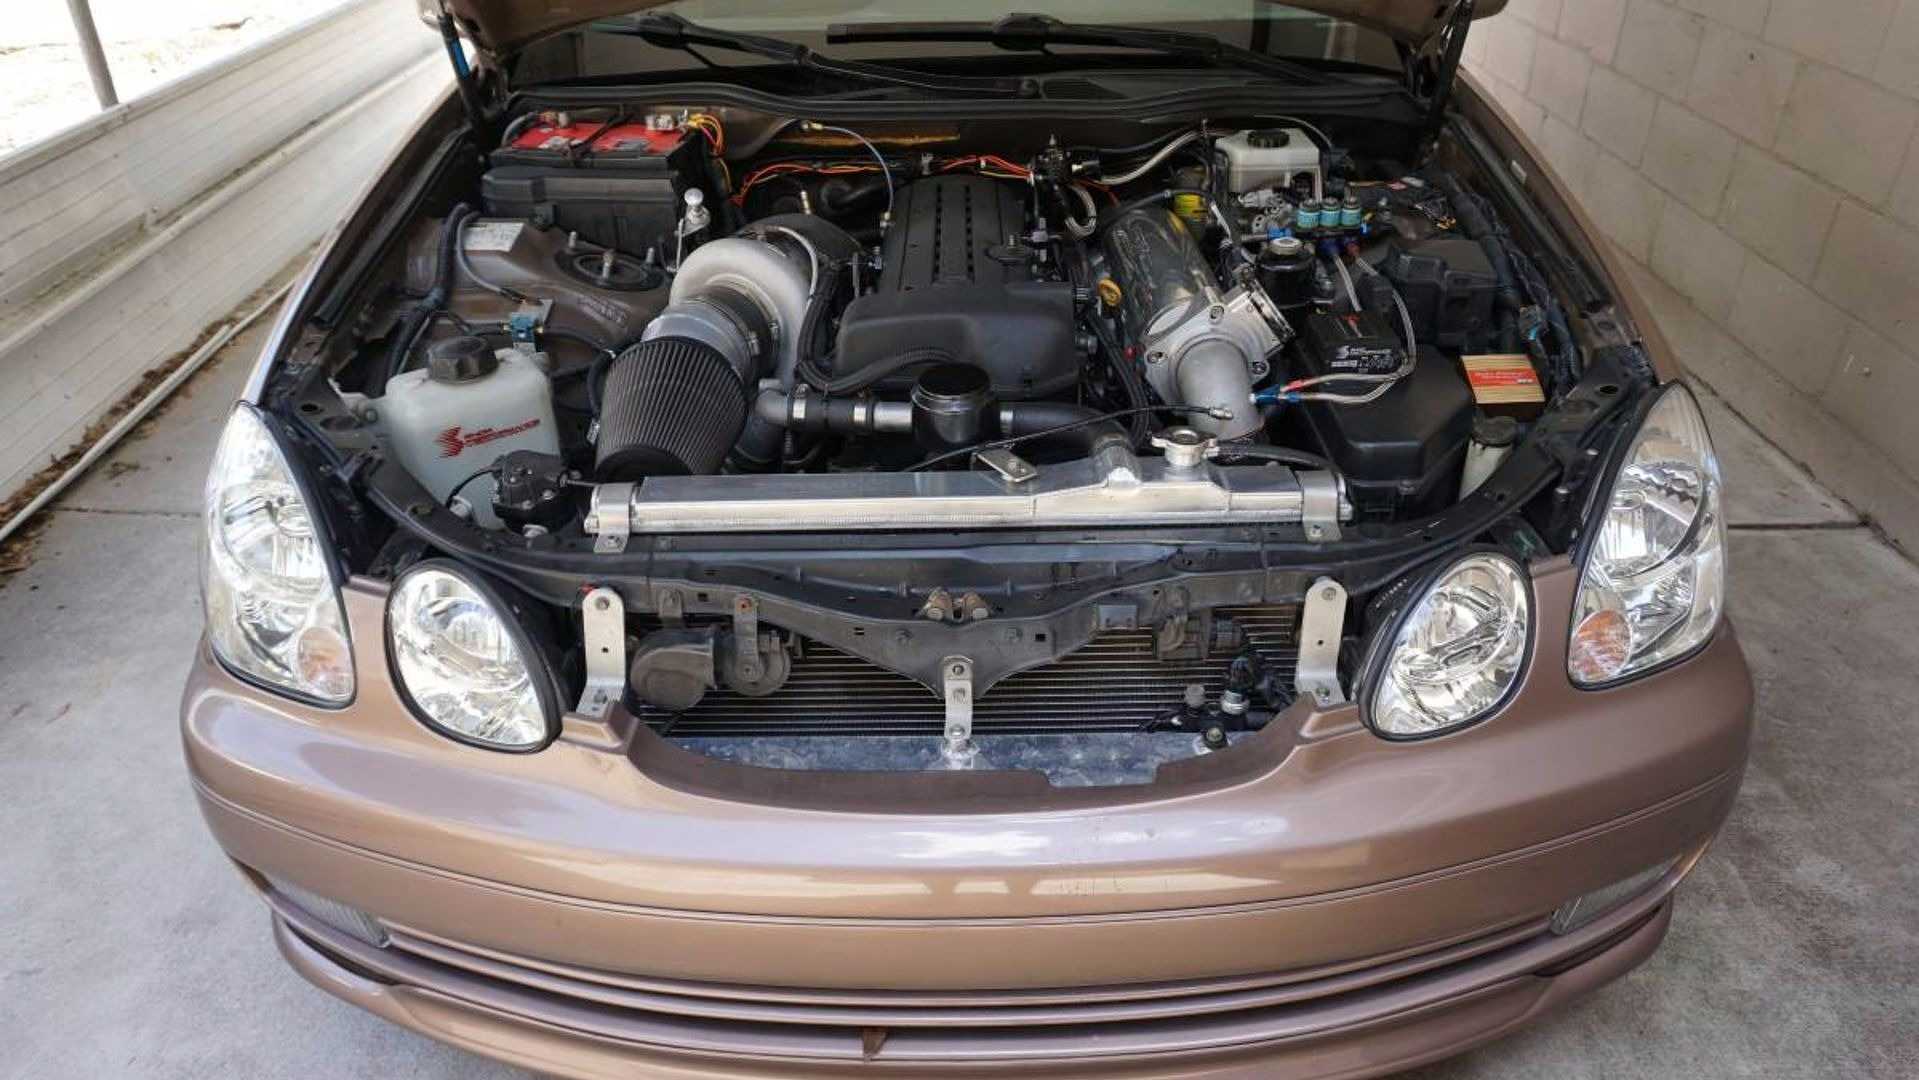 This Bonkers Lexus GS300 Sleeper Makes 850 WHP And Its For Sale